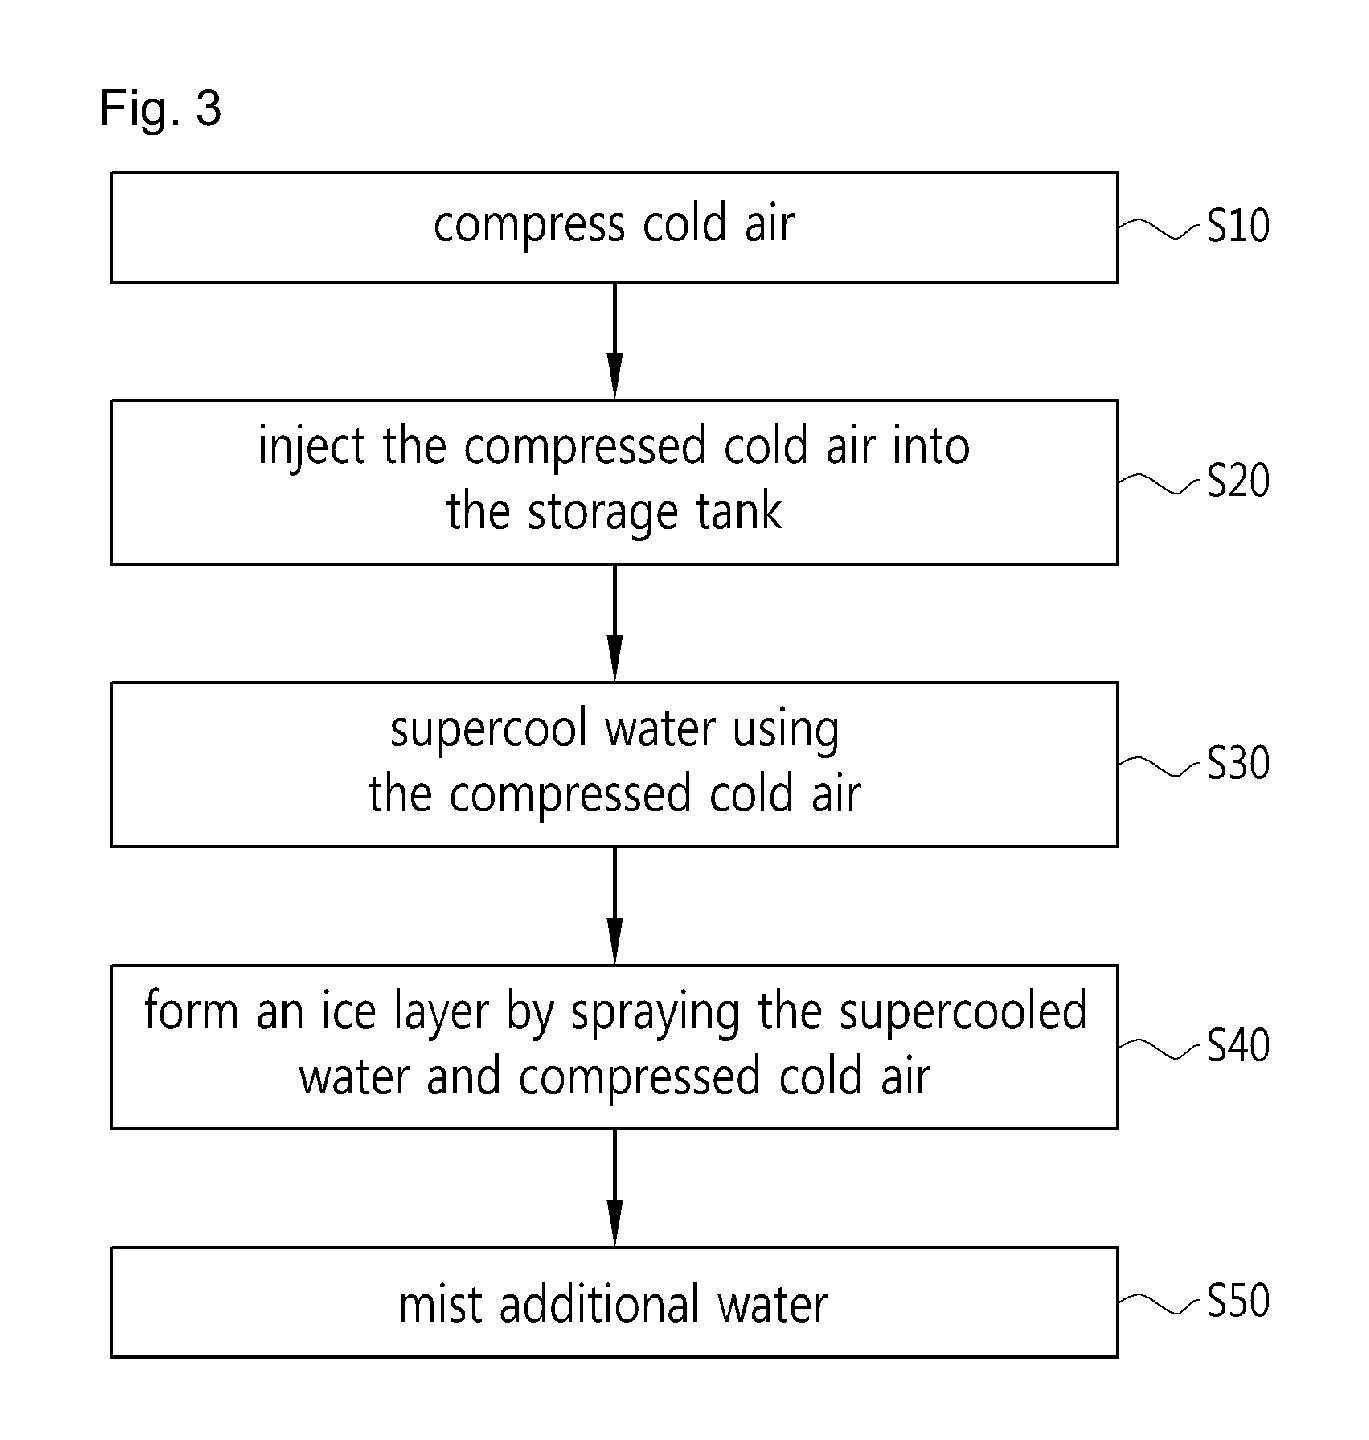 Apparatus and method for producing and storing more ice over ocean